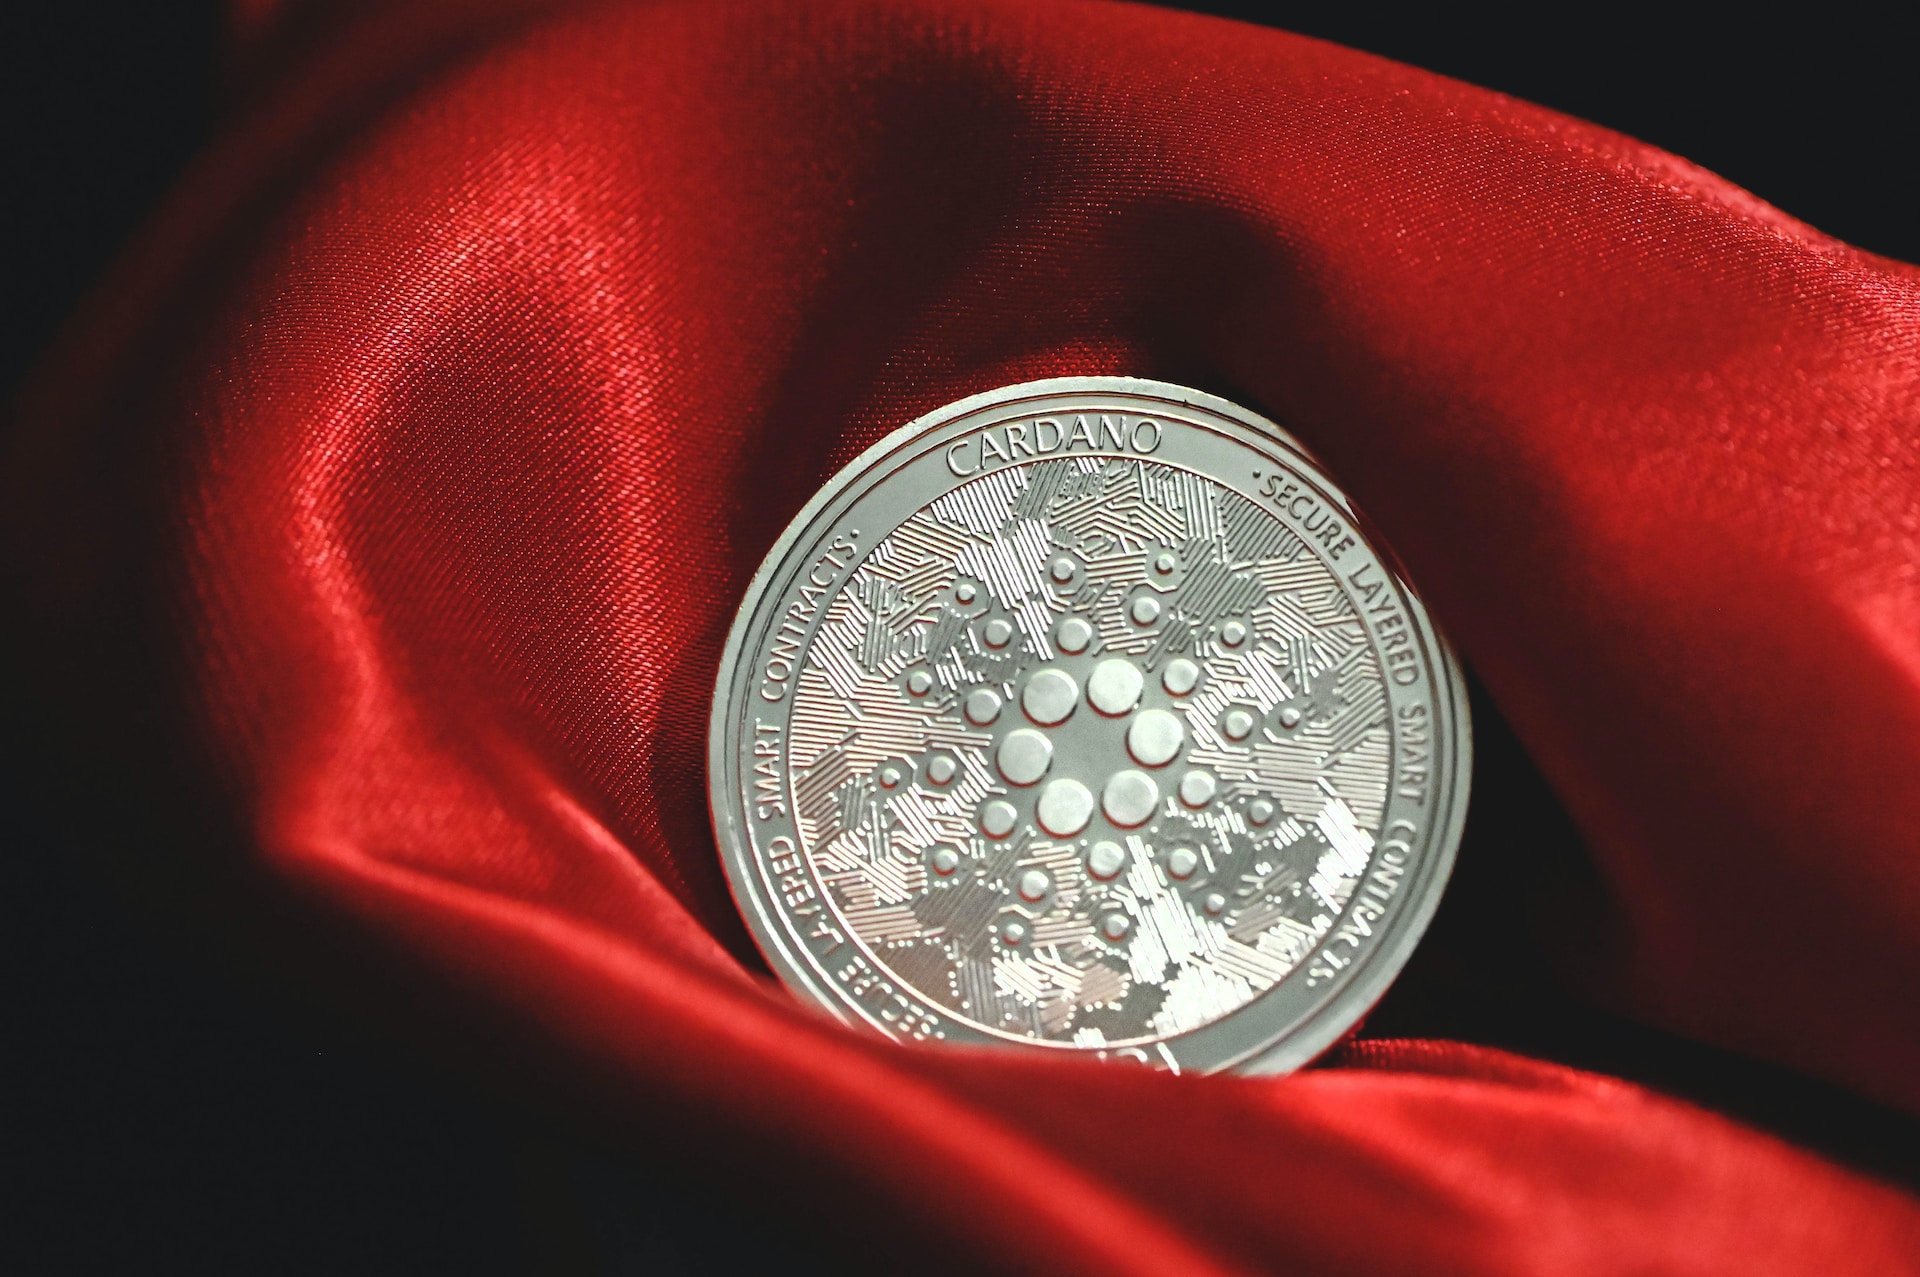 Cardano Price Rejected at $0.36, How Long Will The Correction Last?